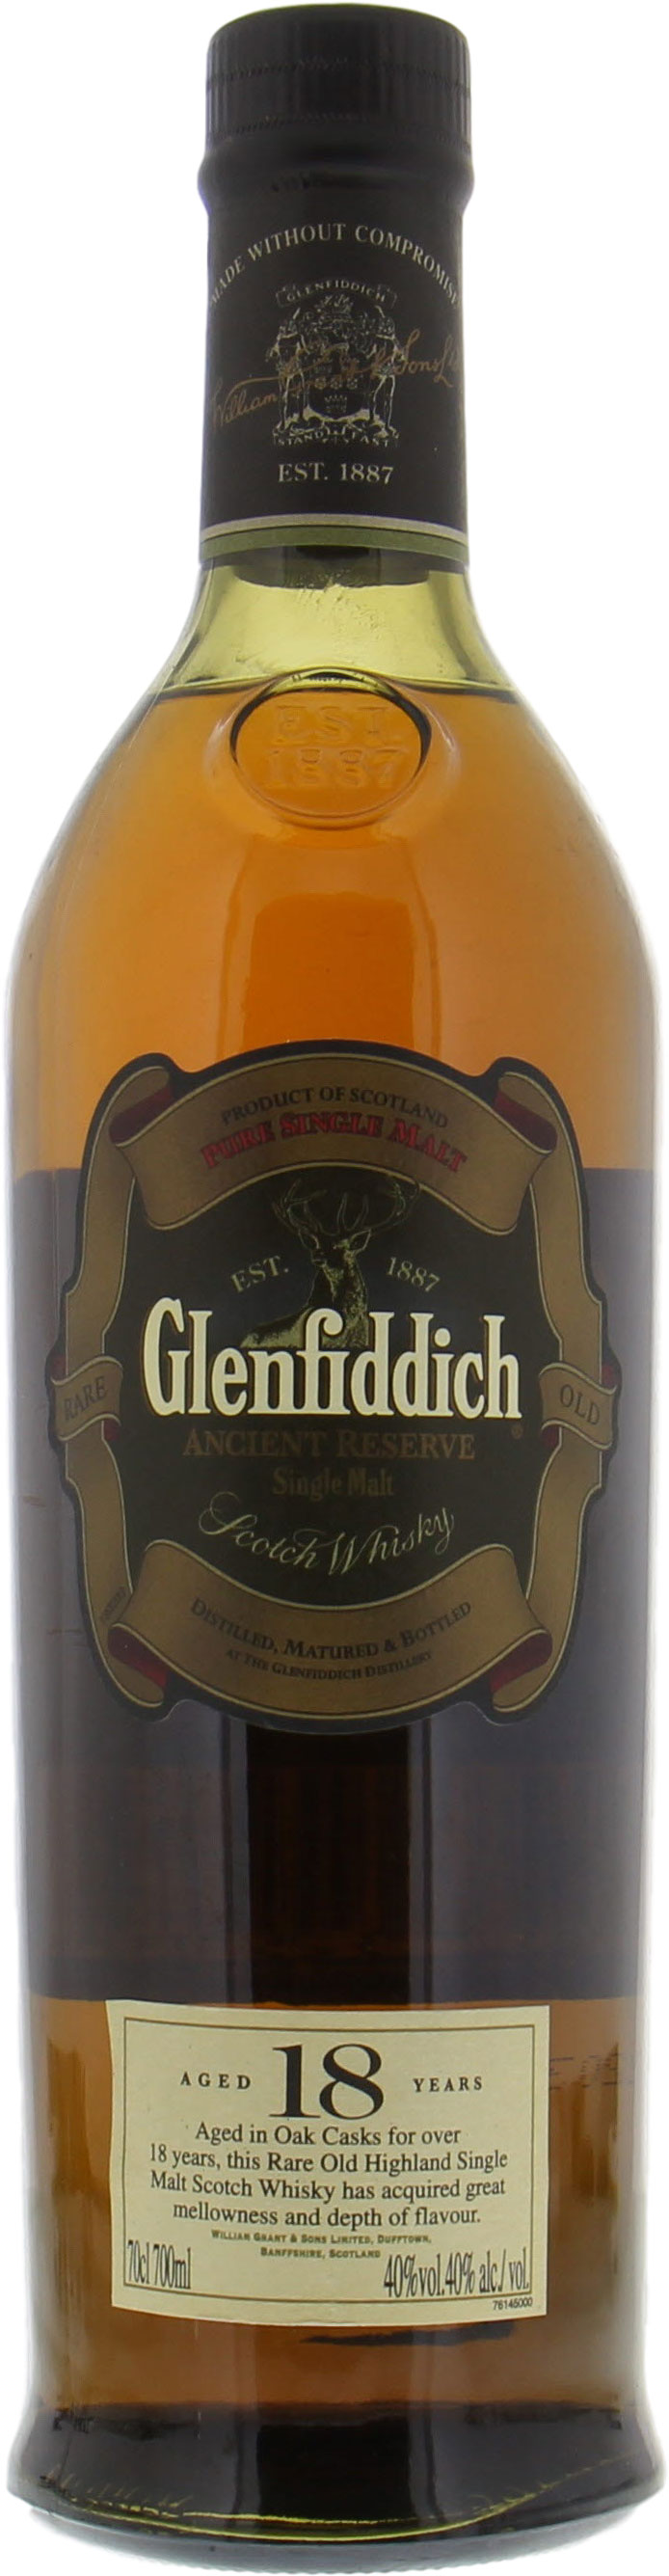 Glenfiddich - 18 Years Ancient Reserve 40% NV